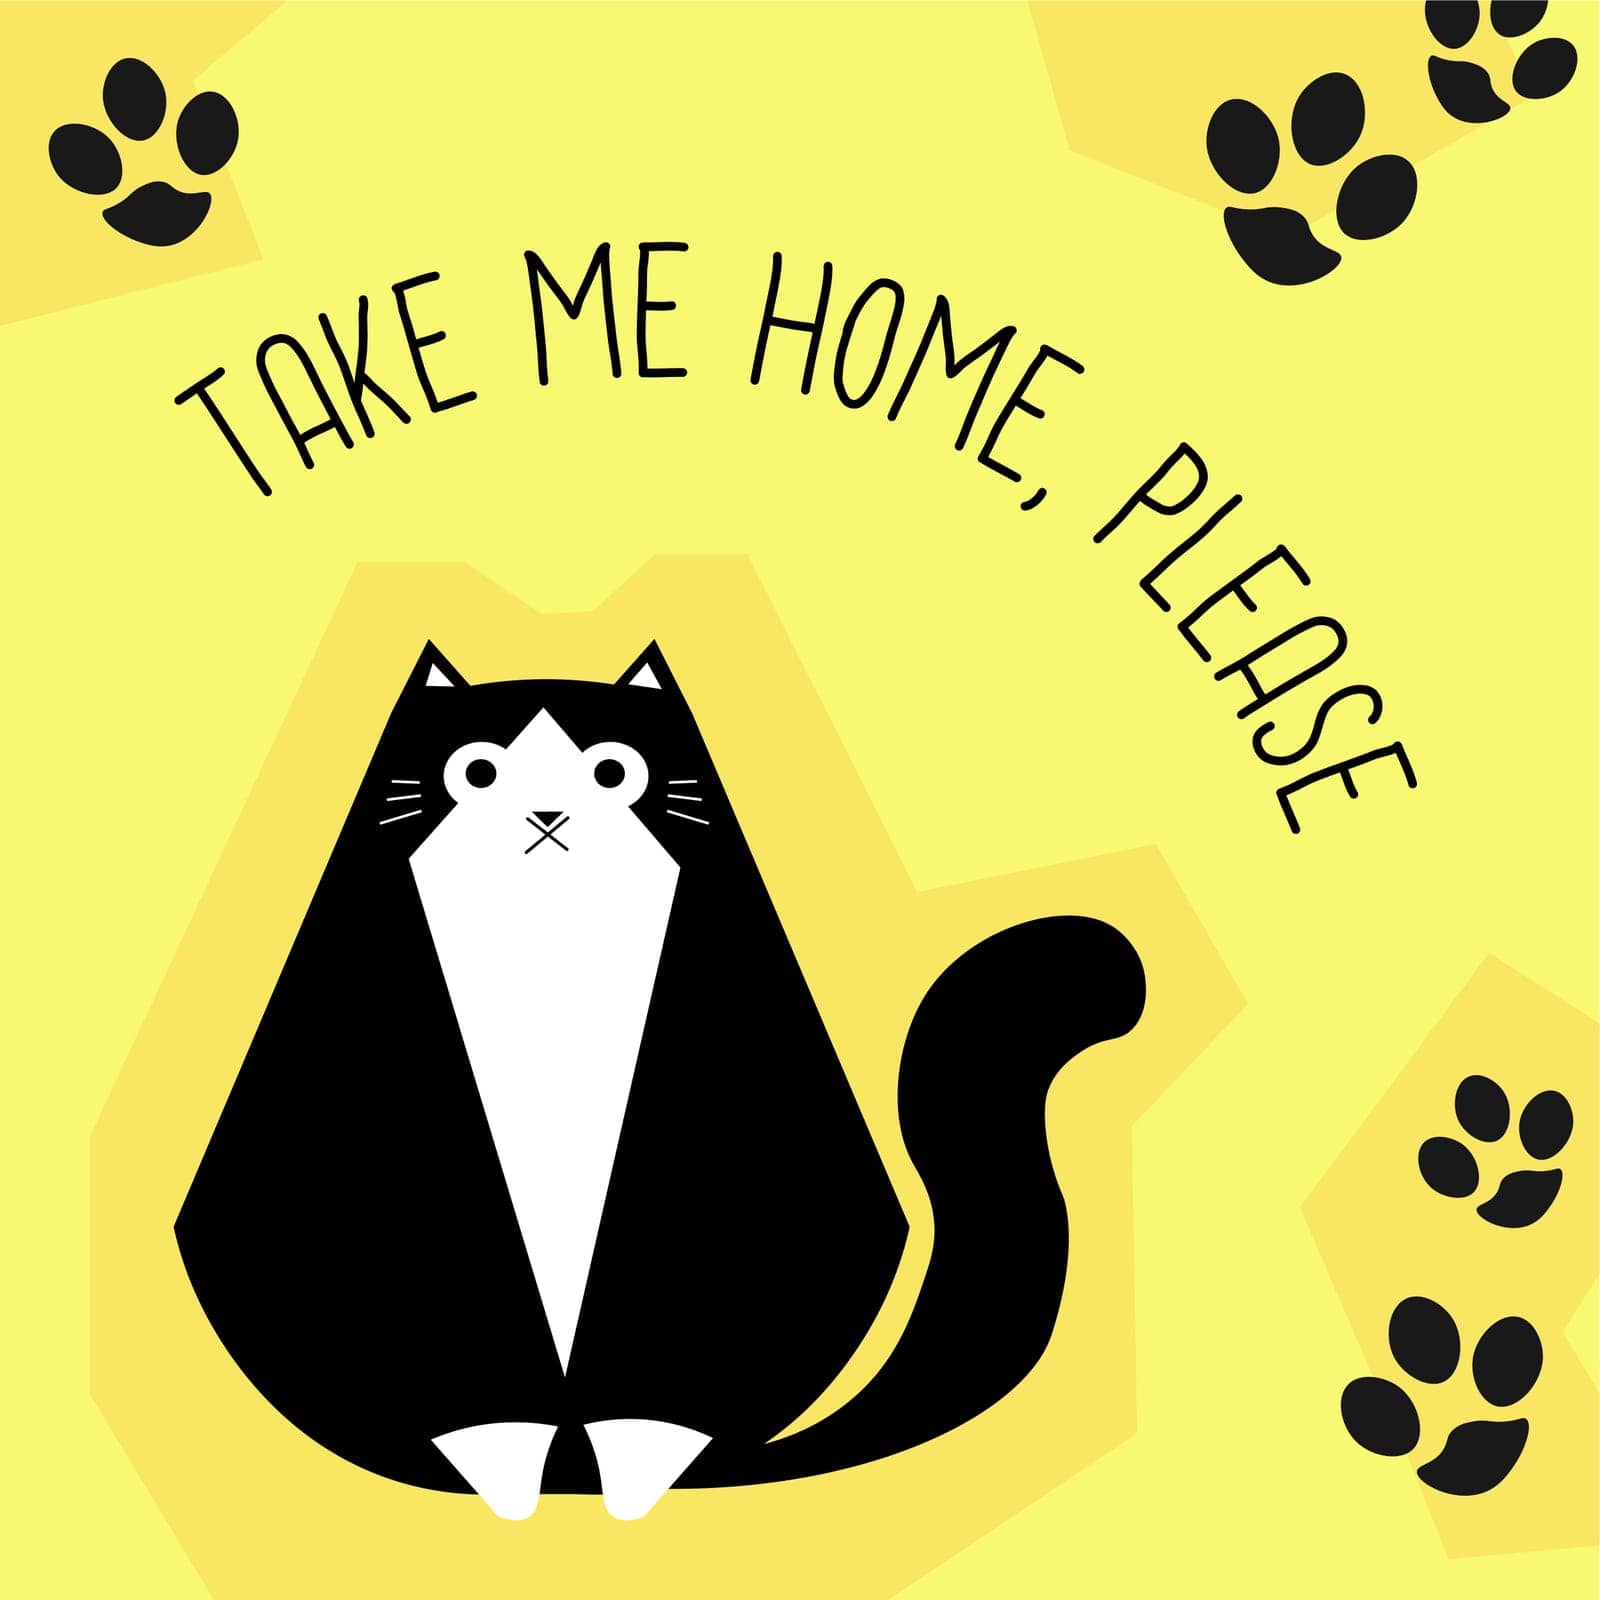 pet adoption service banner, cute kitten and phrase take me home please. Adopt a feline animal and take care for kitty. Cats mammals, poster with paw prints silhouettes. Vector in flat style